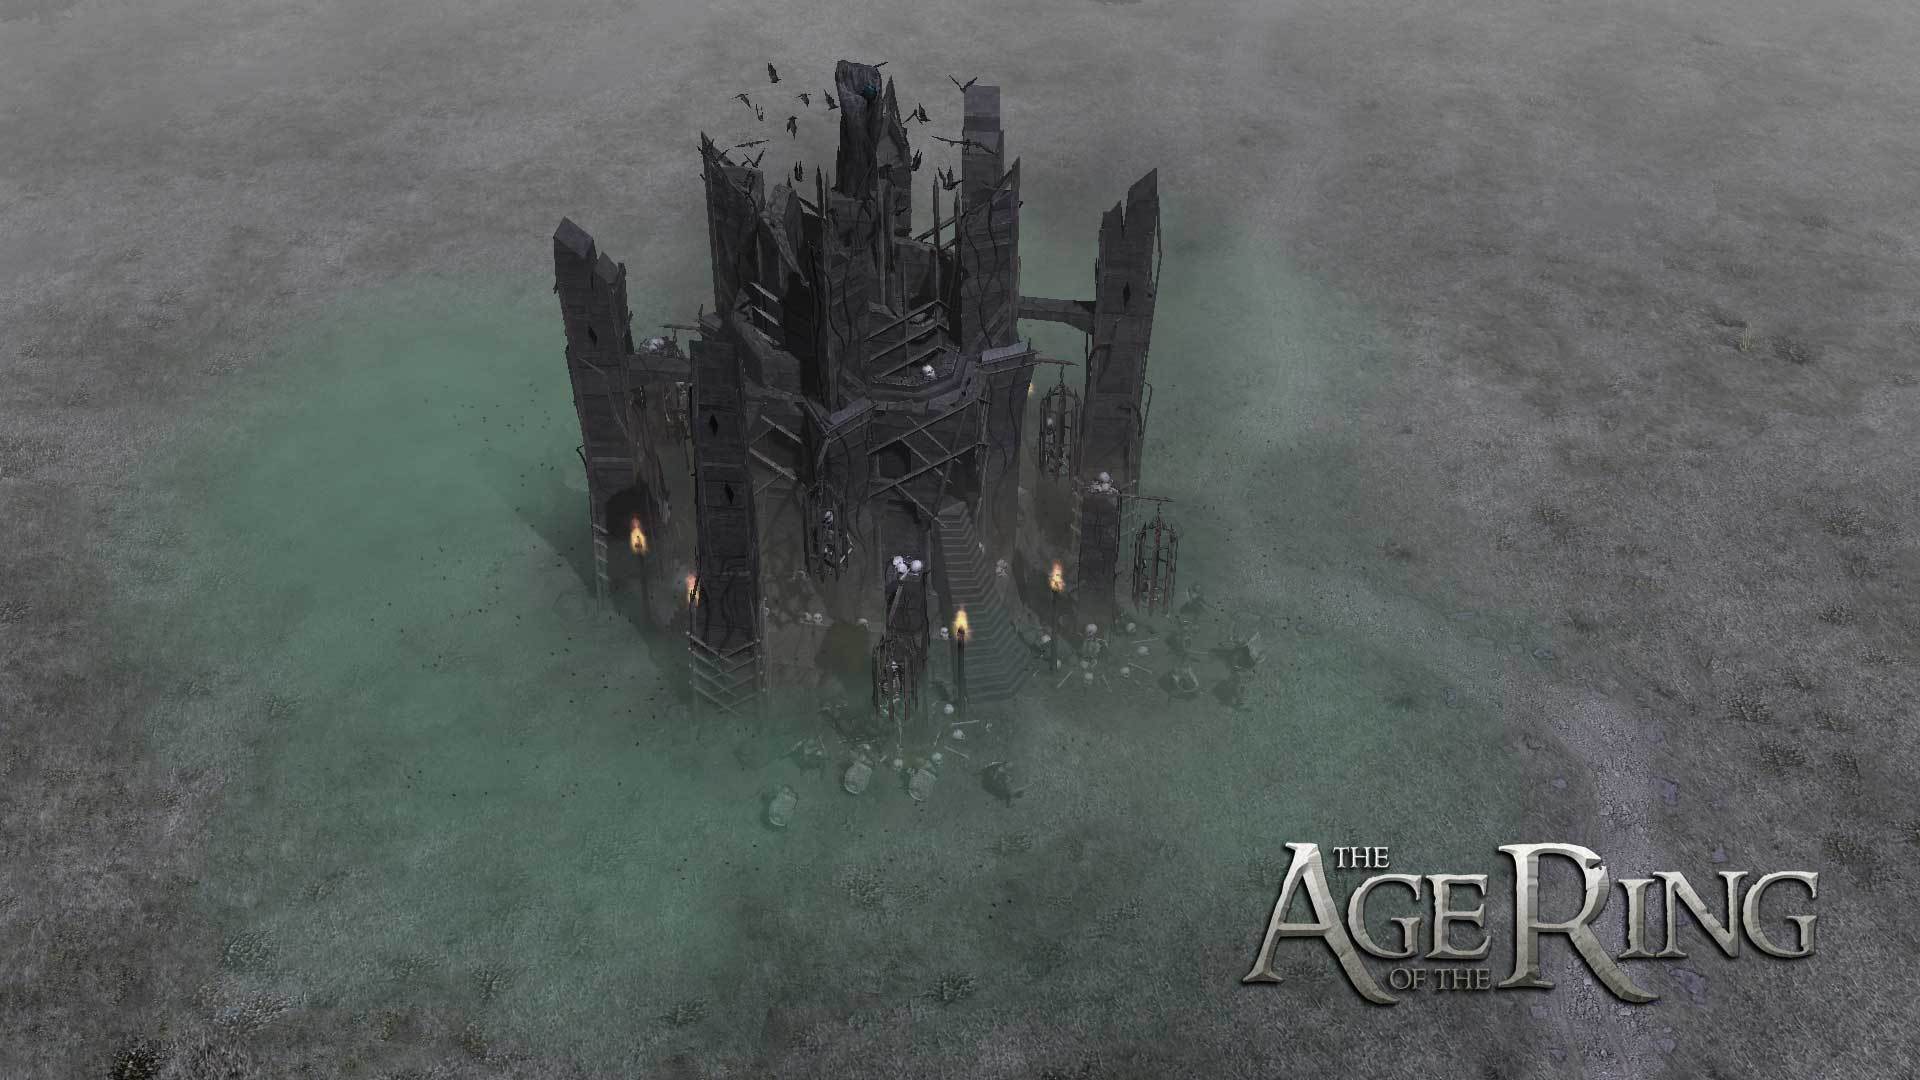 Age of the Ring 5.0: The Dungeons of Dol Guldur - Fashion, Lord of the Rings, Стратегия, Bfme modding, Mordor, Video game, Longpost